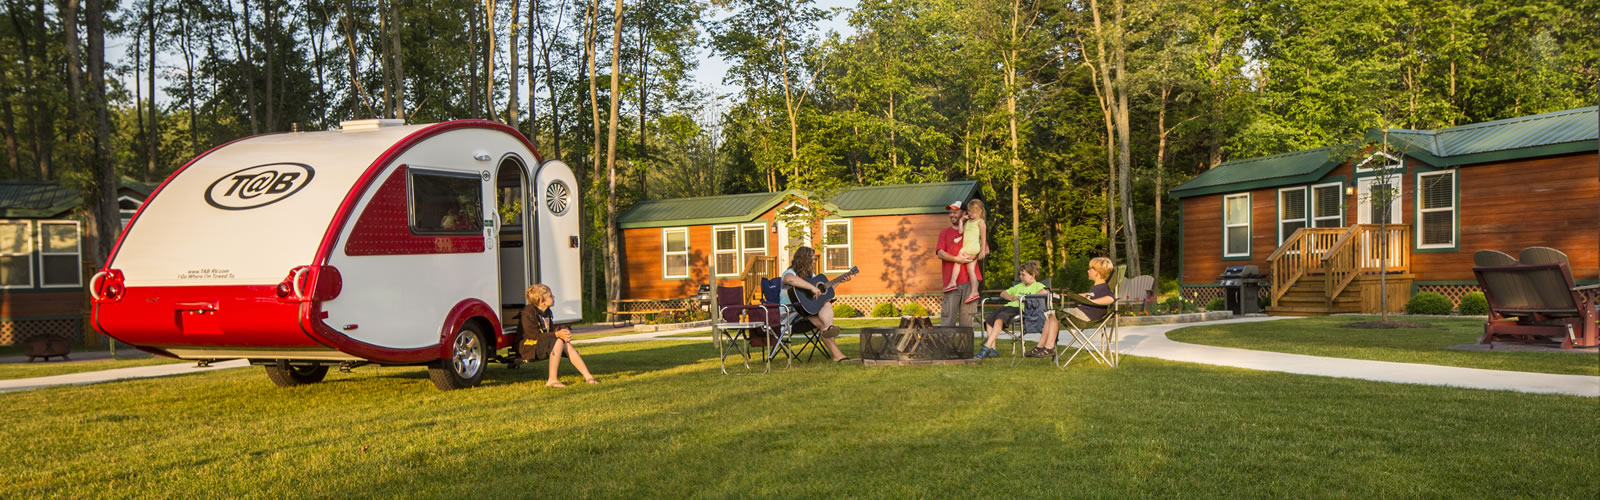 If you want even more comforts from home reserve Deluxe Cabins for your group. Most deluxe cabins feature kitchenettes along with gas grills and fire pits